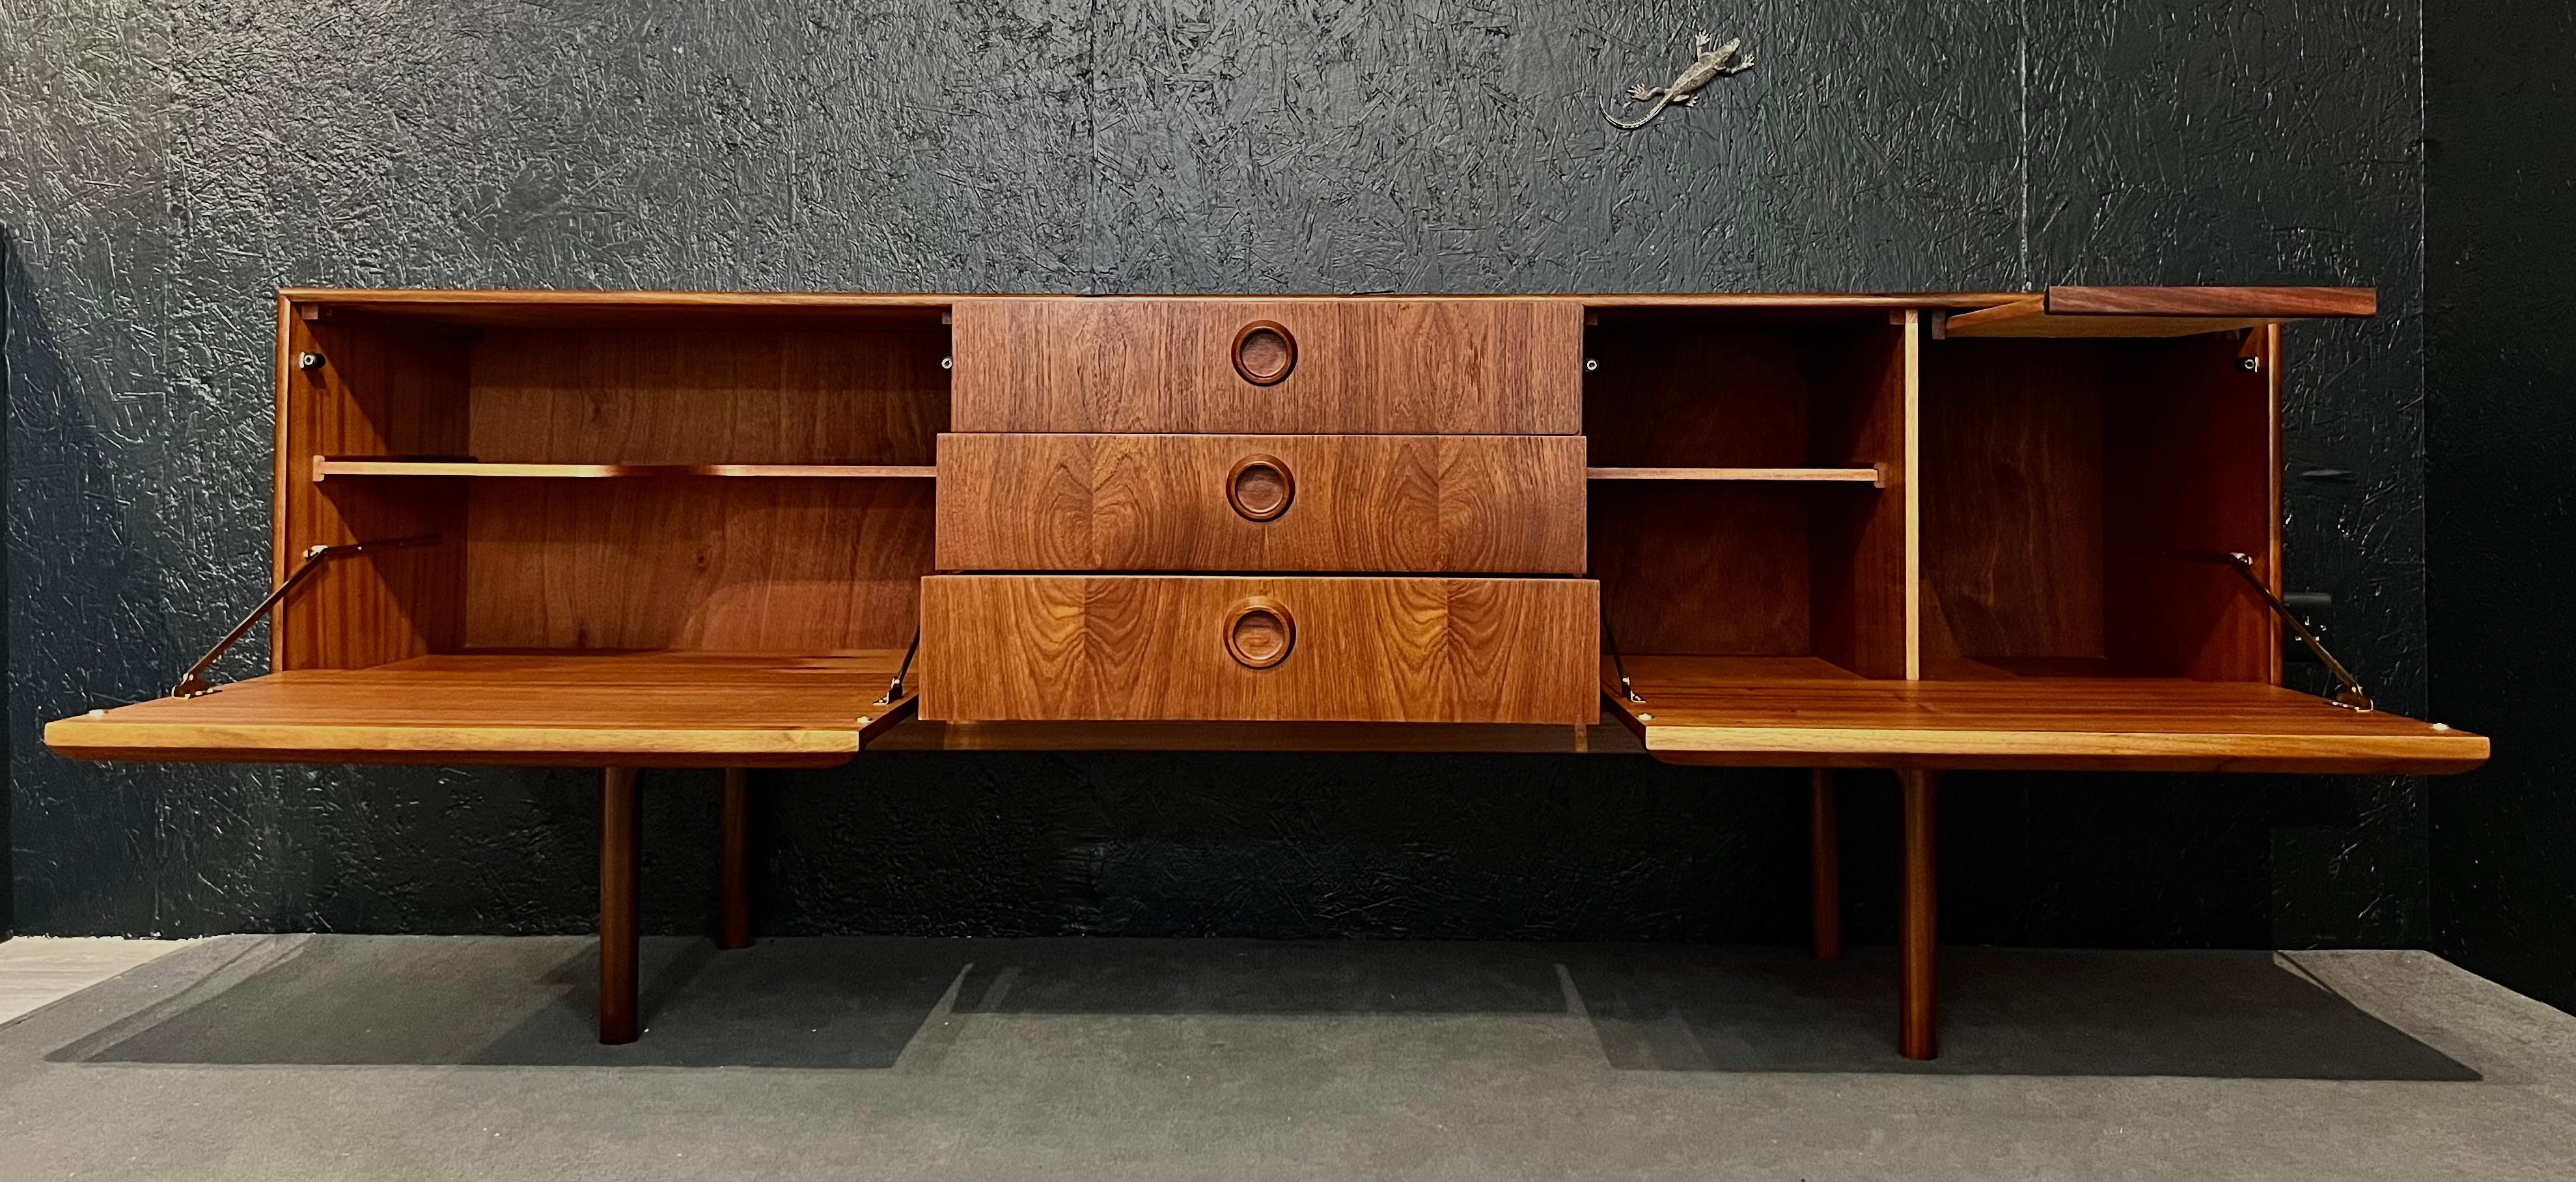 Stunning and unusual mid-century sideboard designed by Tom Robertson for cabinetmaker A.H. McIntosh in Scotland for the well-known Dunoon collection.

This piece is characterized by the artisan work, the beauty of its organic round handles and of